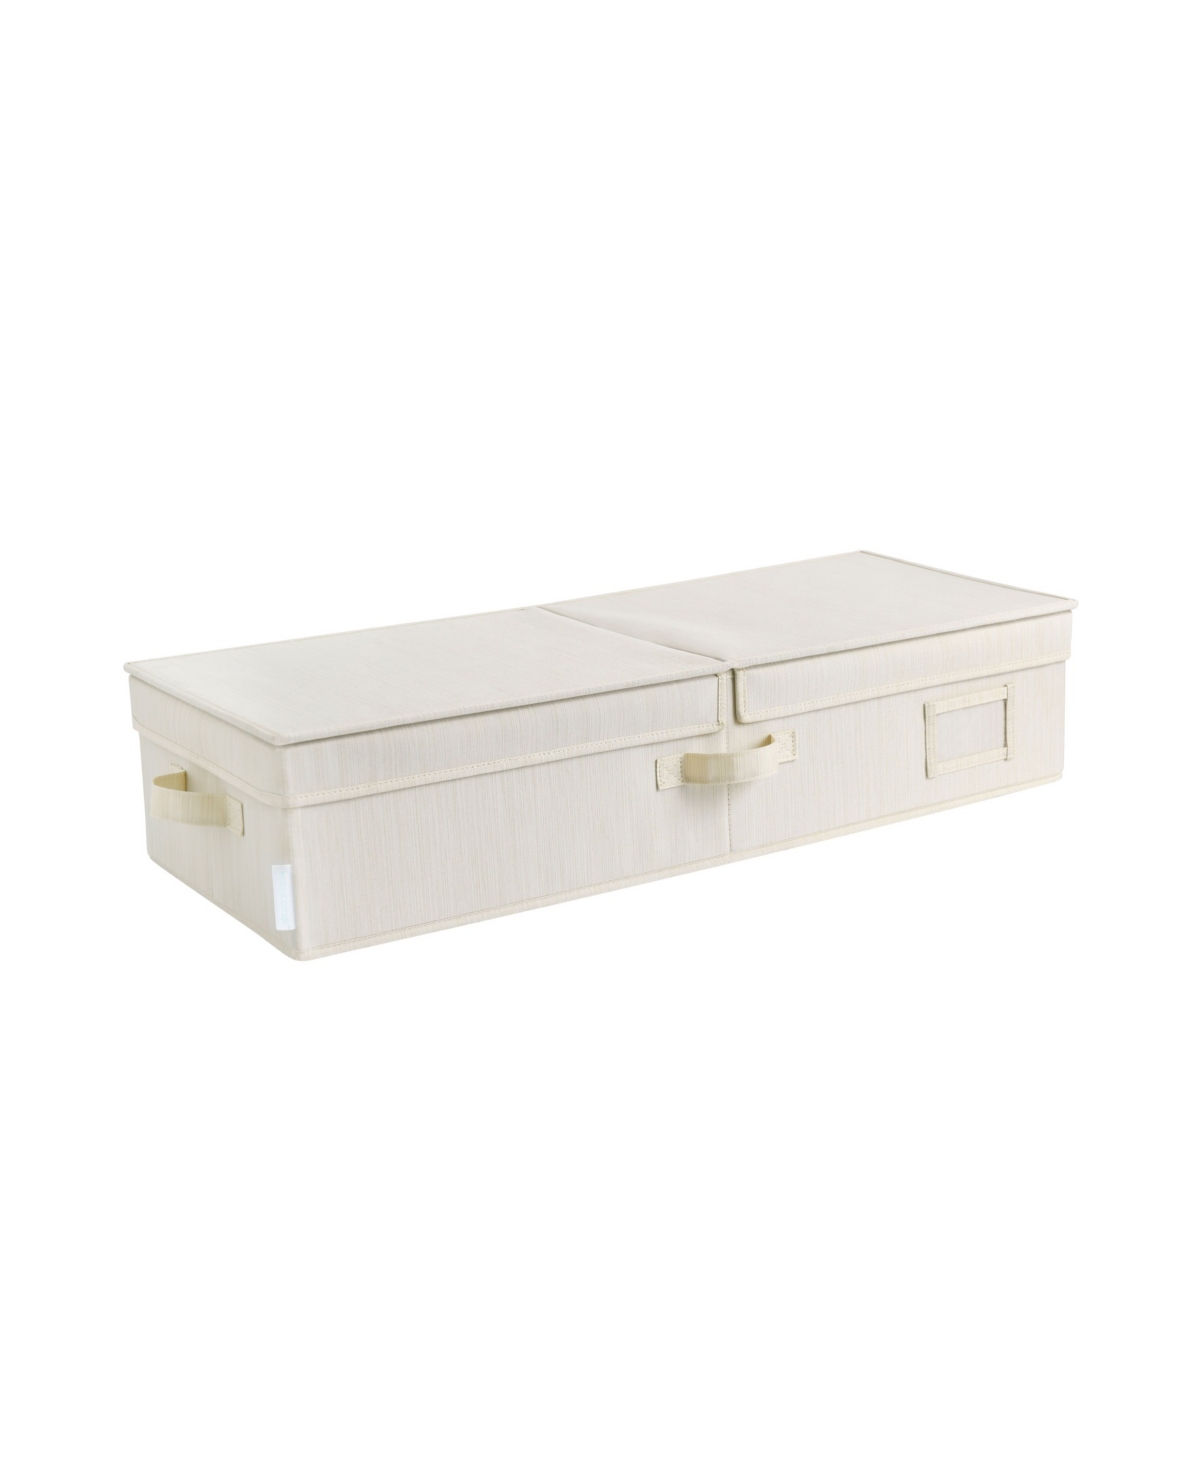 Wethinkstorage 38.8 Litre Collapsible Under Bed Fabric Storage Bin With Double-open Lid In Ivory